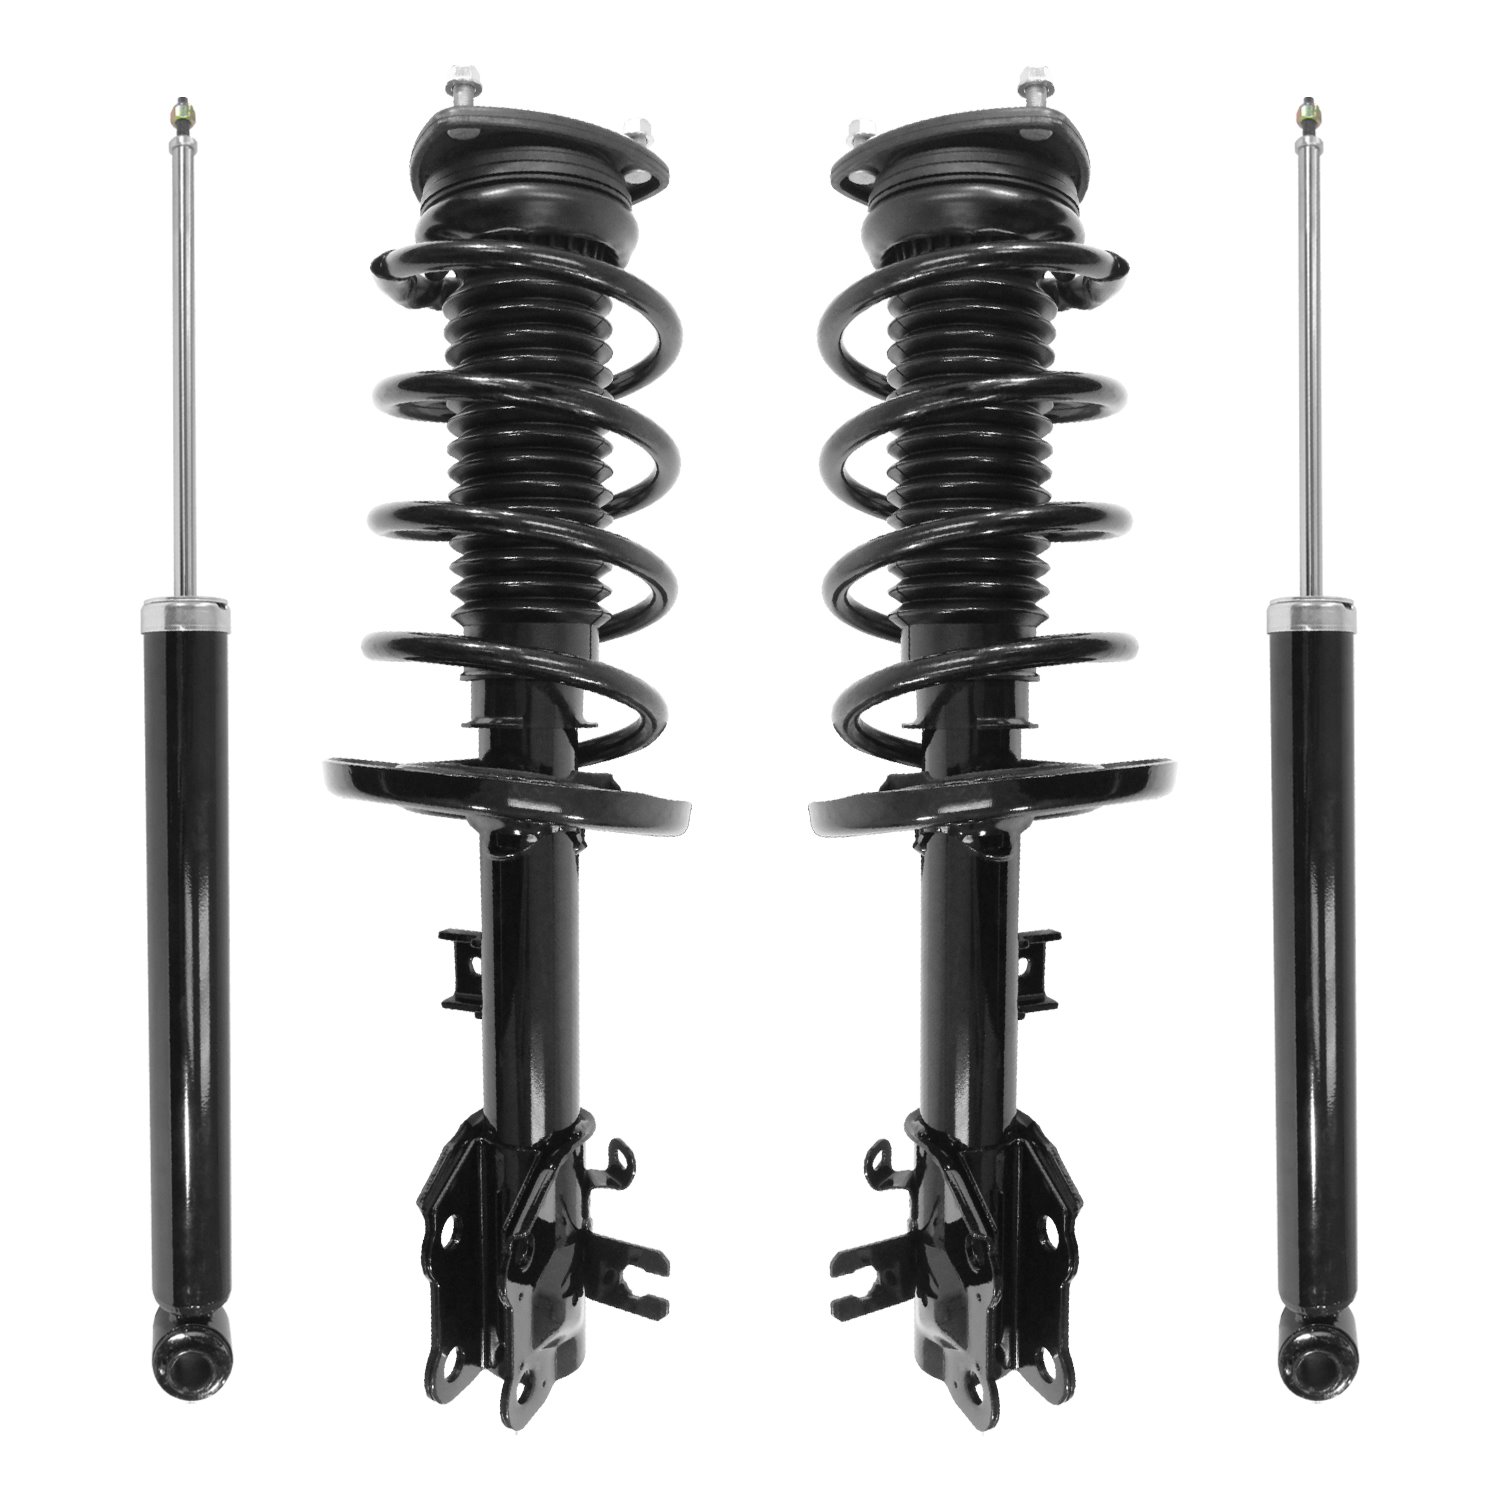 4-11695-259190-001 Front & Rear Suspension Strut & Coil Spring Assembly Fits Select Mazda CX-5